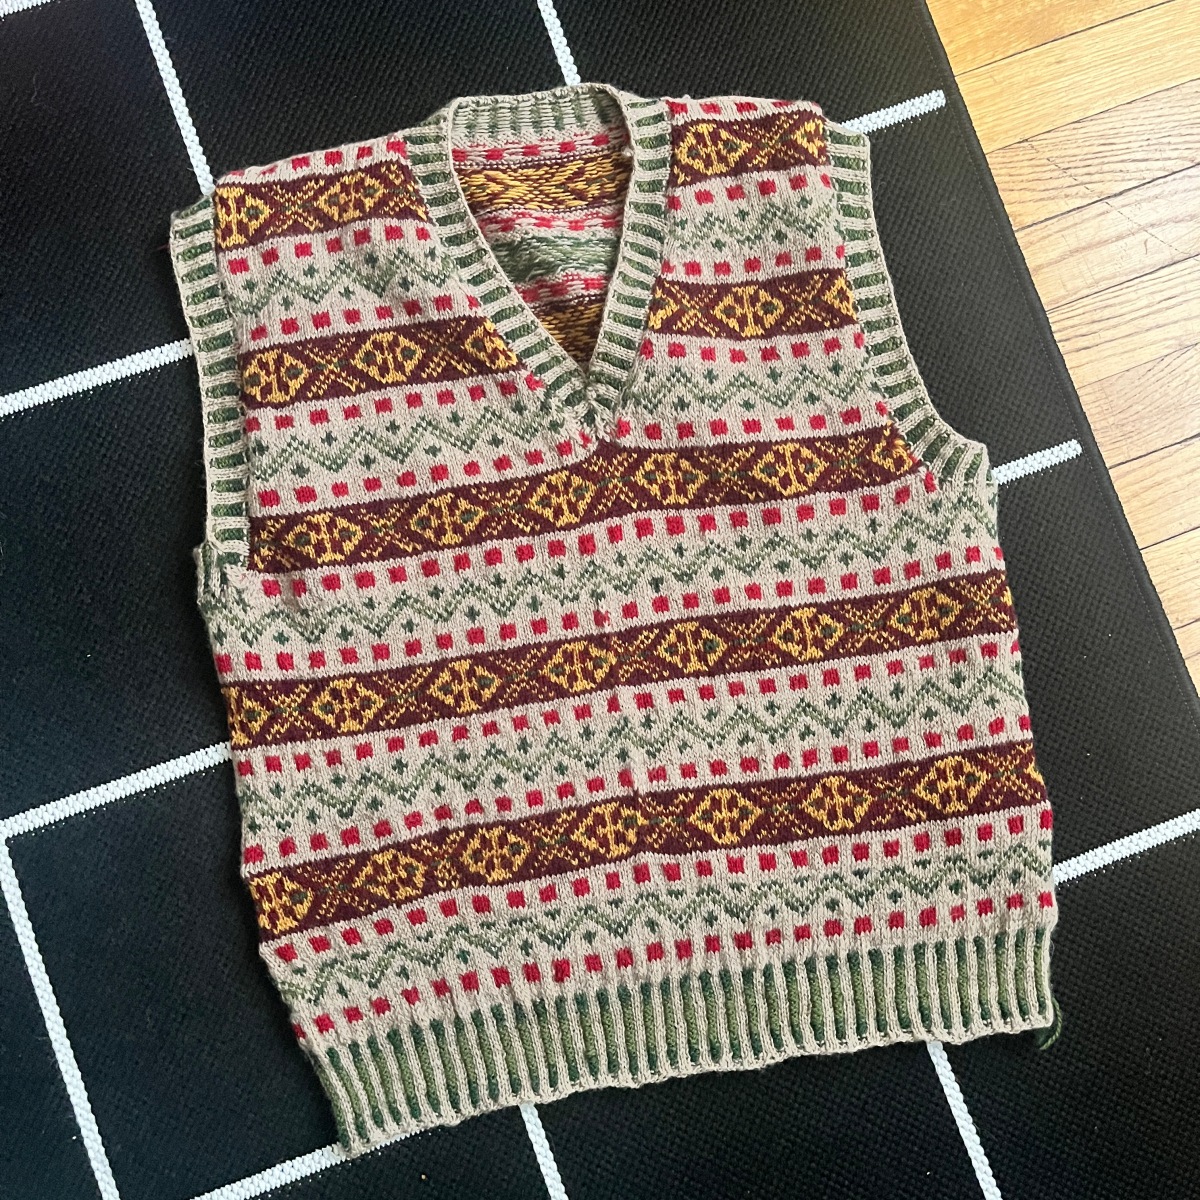 Knitting the 1920s Sweater Vest that Changed Fashion History: The Prince of Wales Sweater Vest